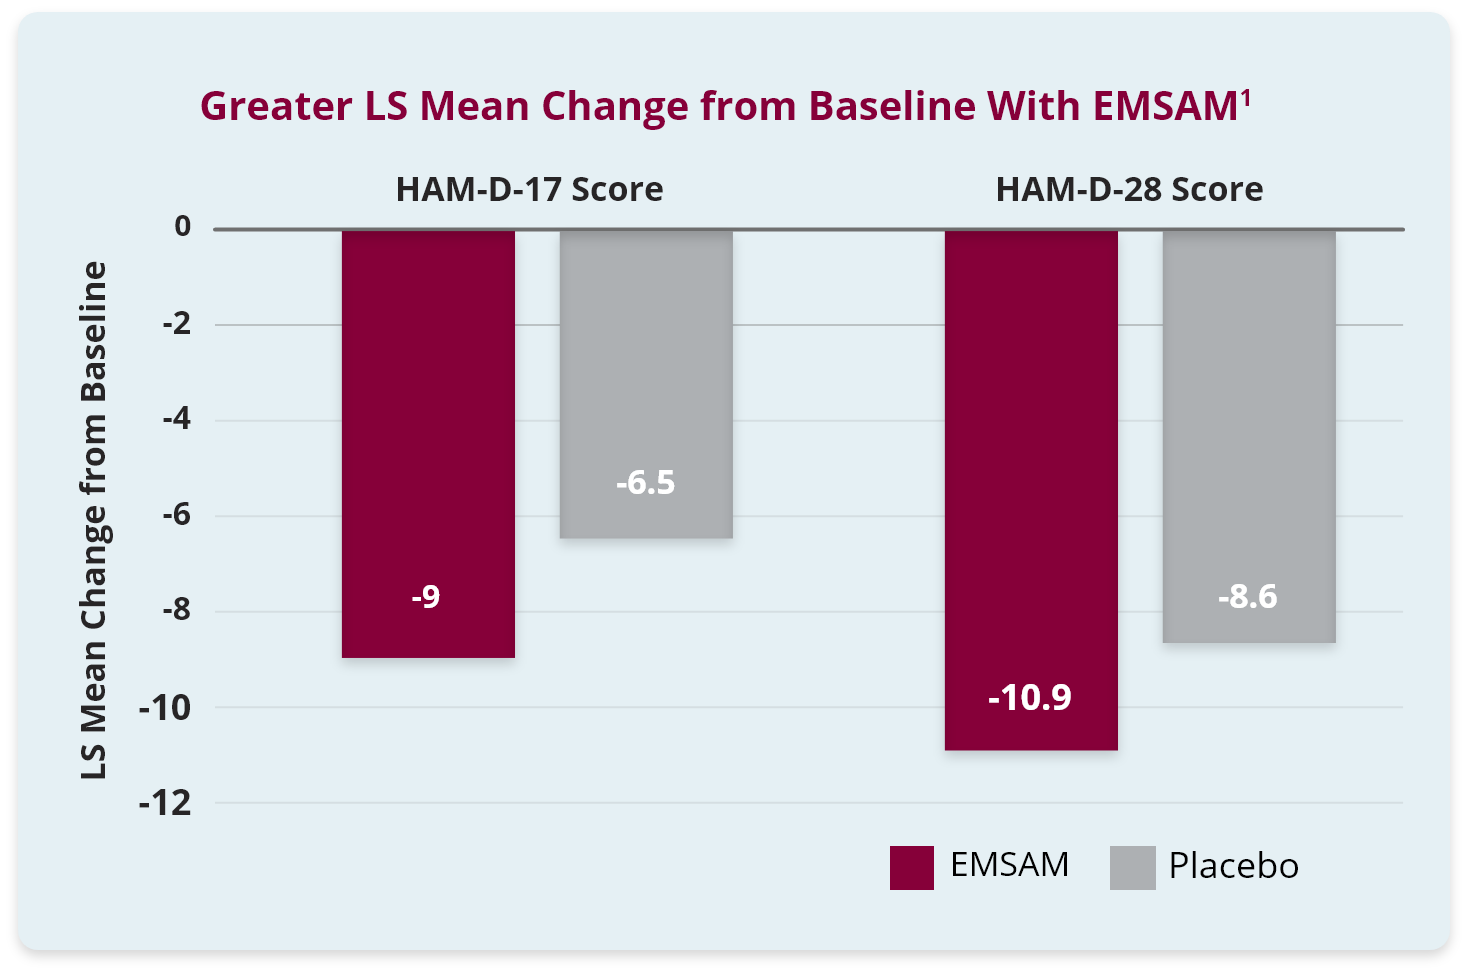 Bar chart showing LS mean change from baseline in HAM-D-17 and HAM-D-28 scores that are described above